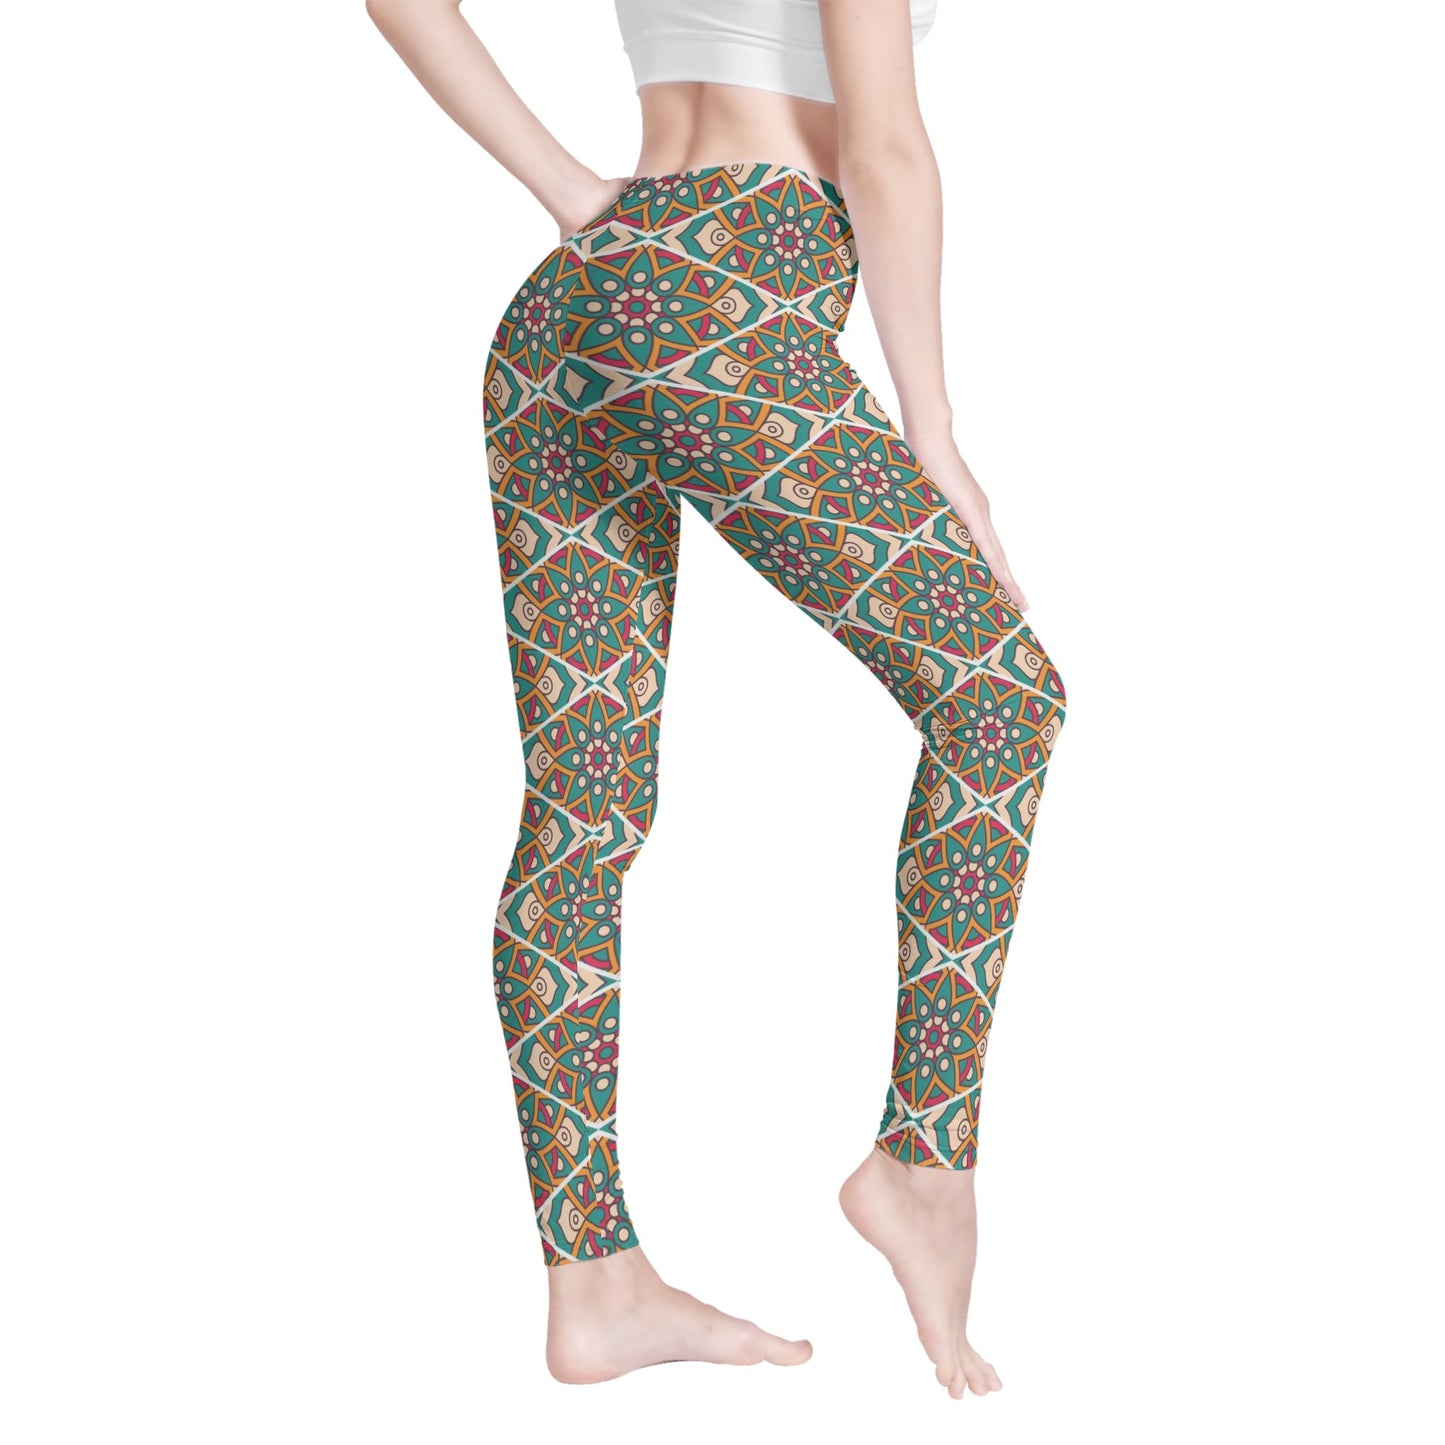 Star System Multi-Color Womens Leggings that provide a perfect fit